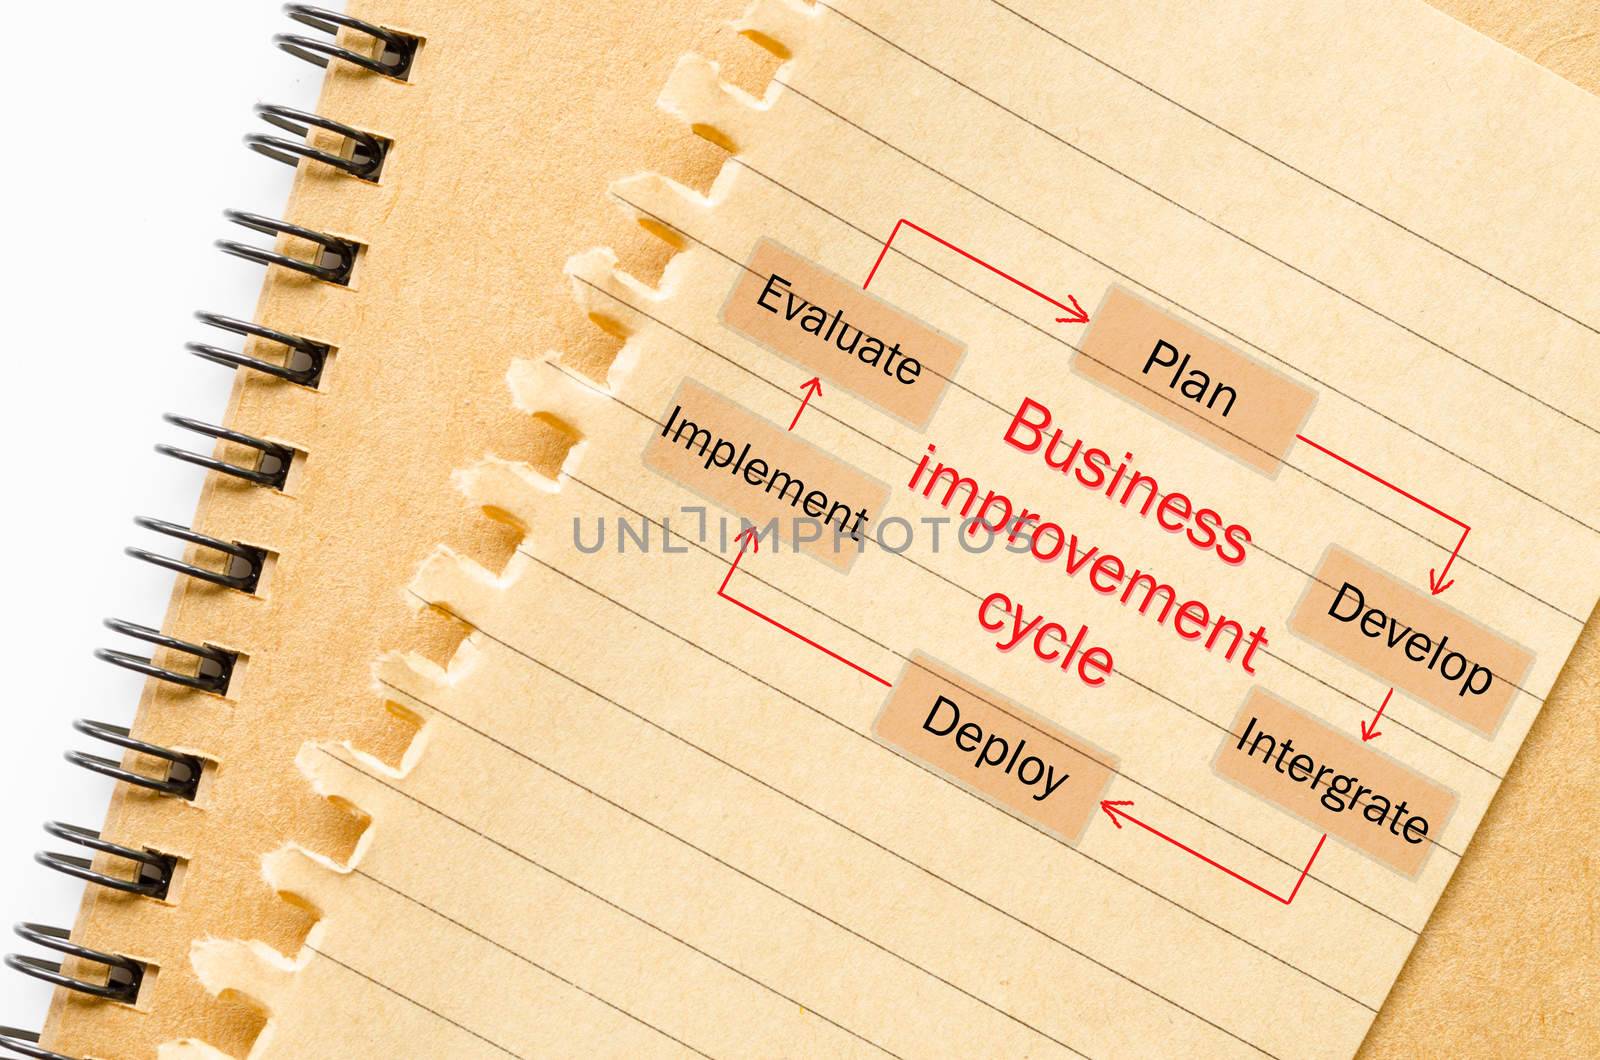 Business improvement cycle process, business concept for presentations and reports.